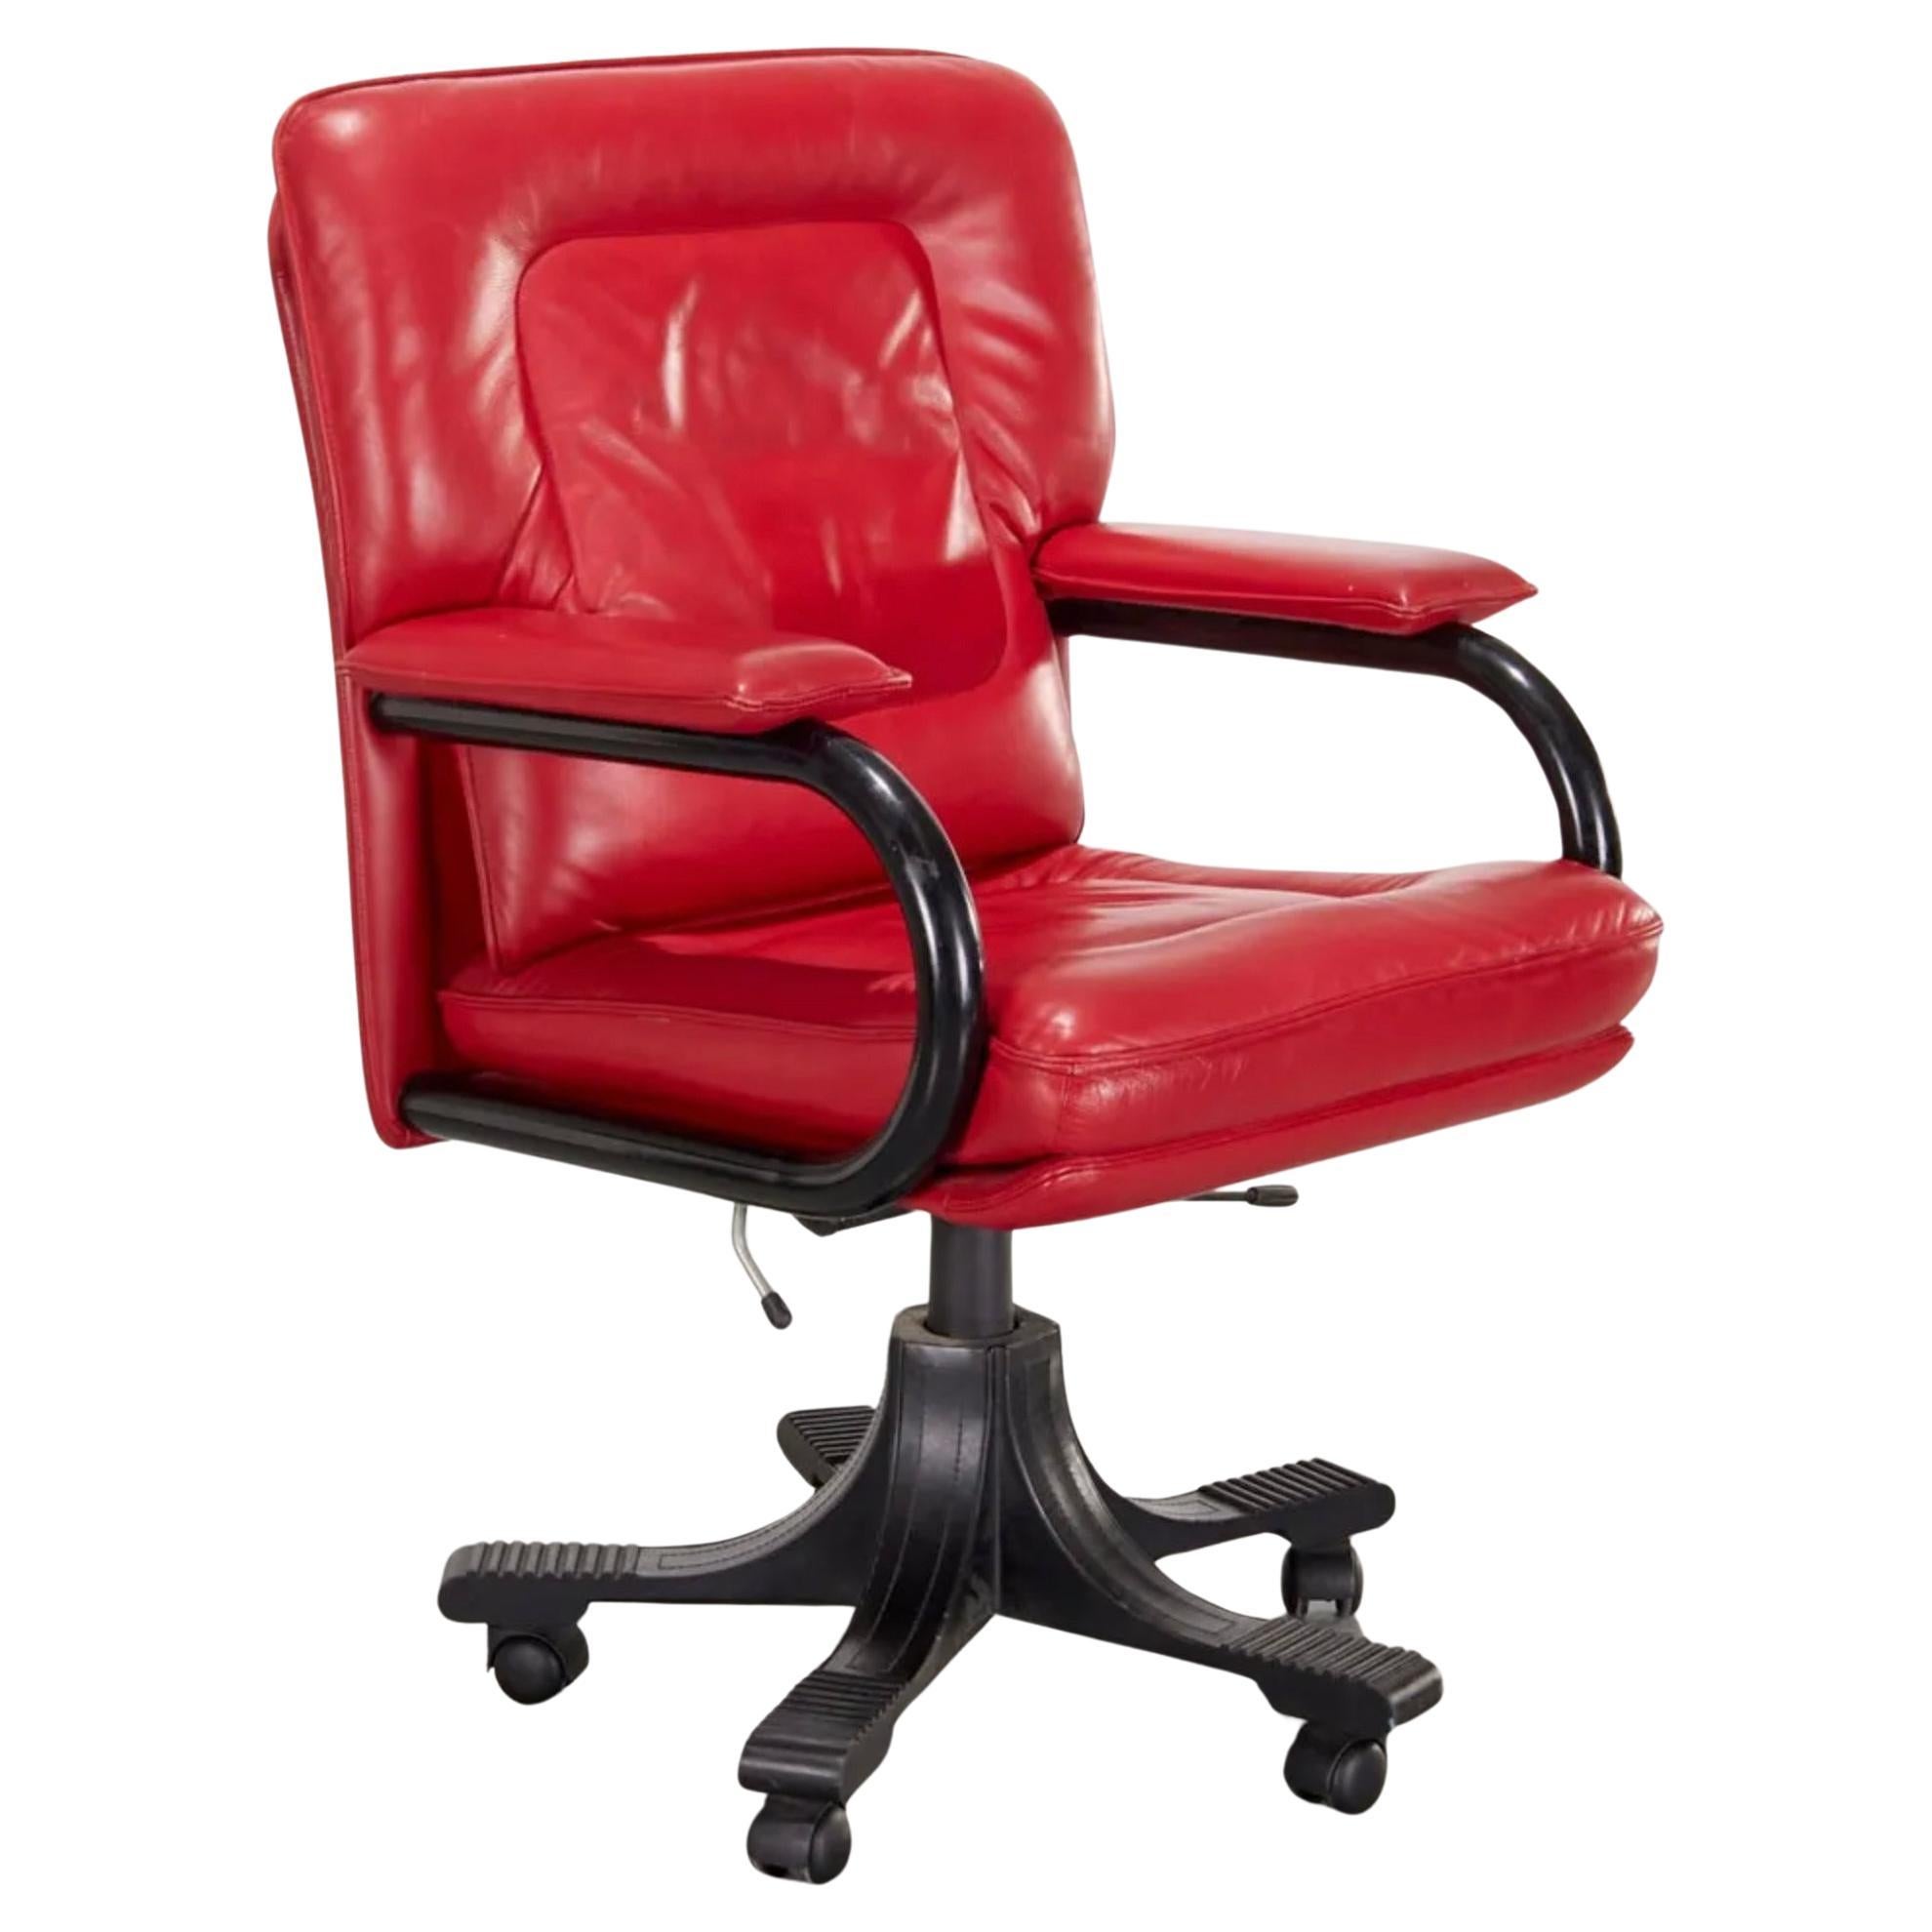 Metal Stunning and luxurious Pace leather Executive Chair For Sale